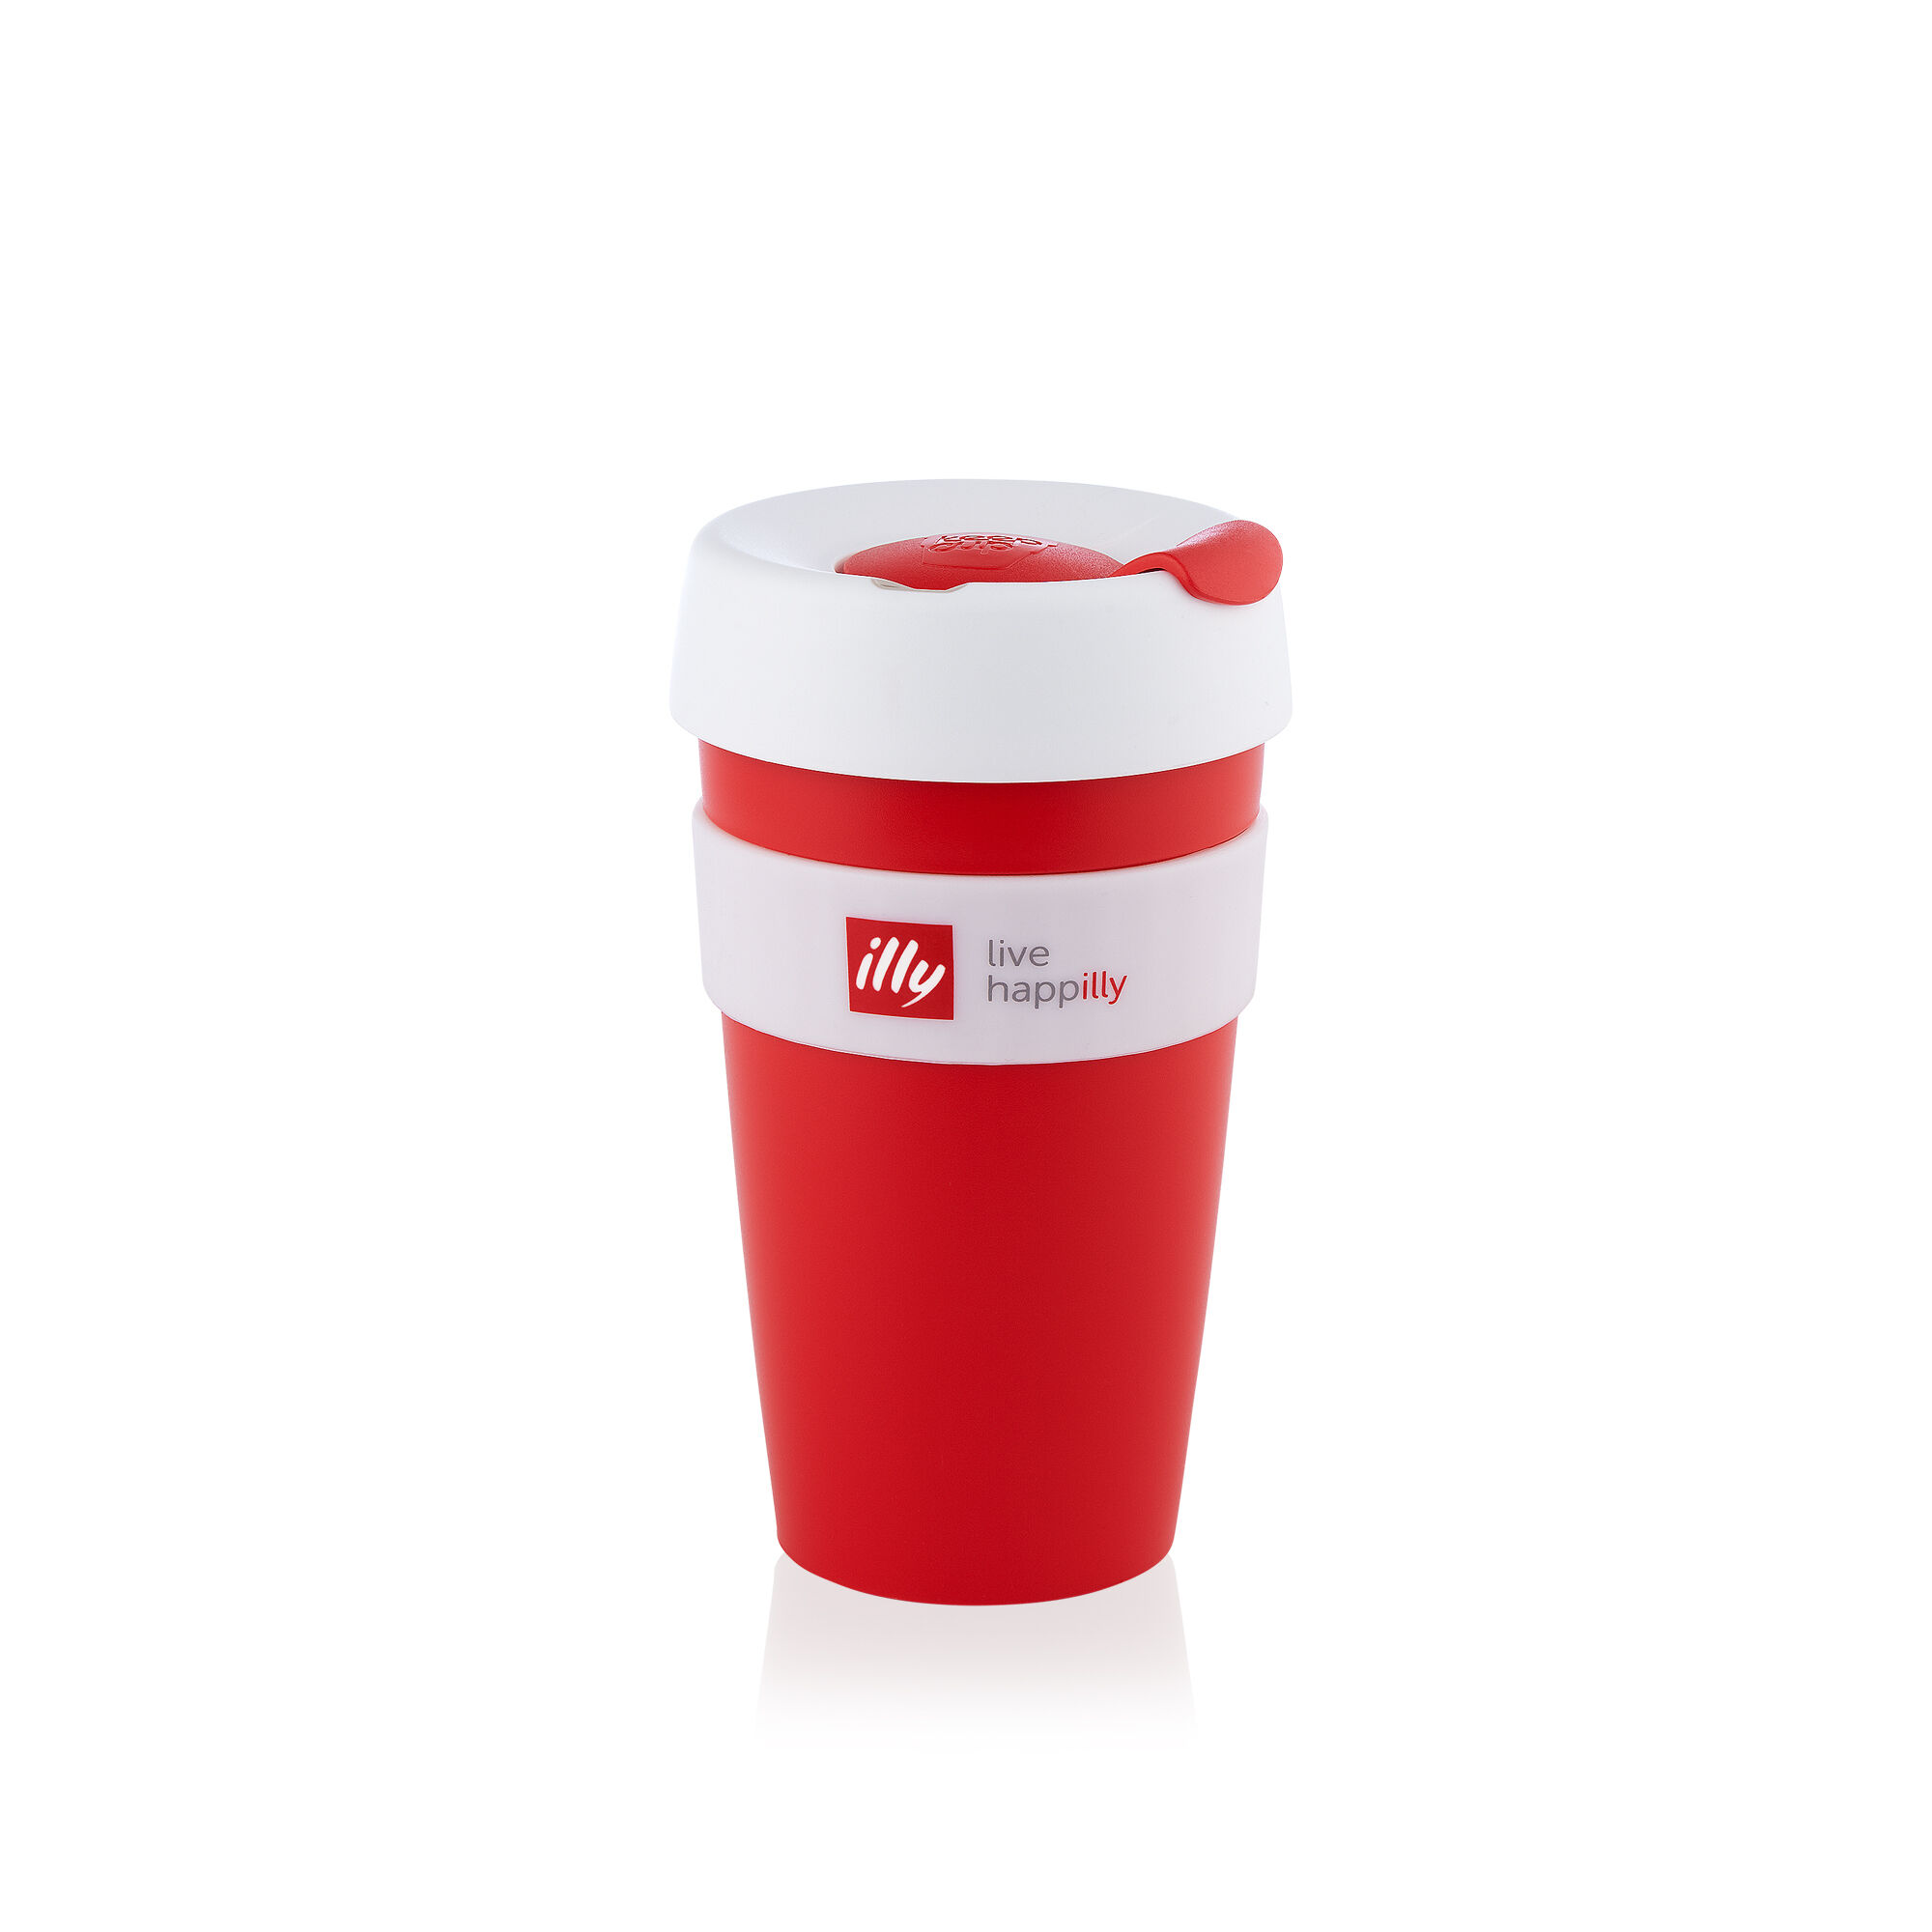 live happilly Red with White Lid KeepCup front view